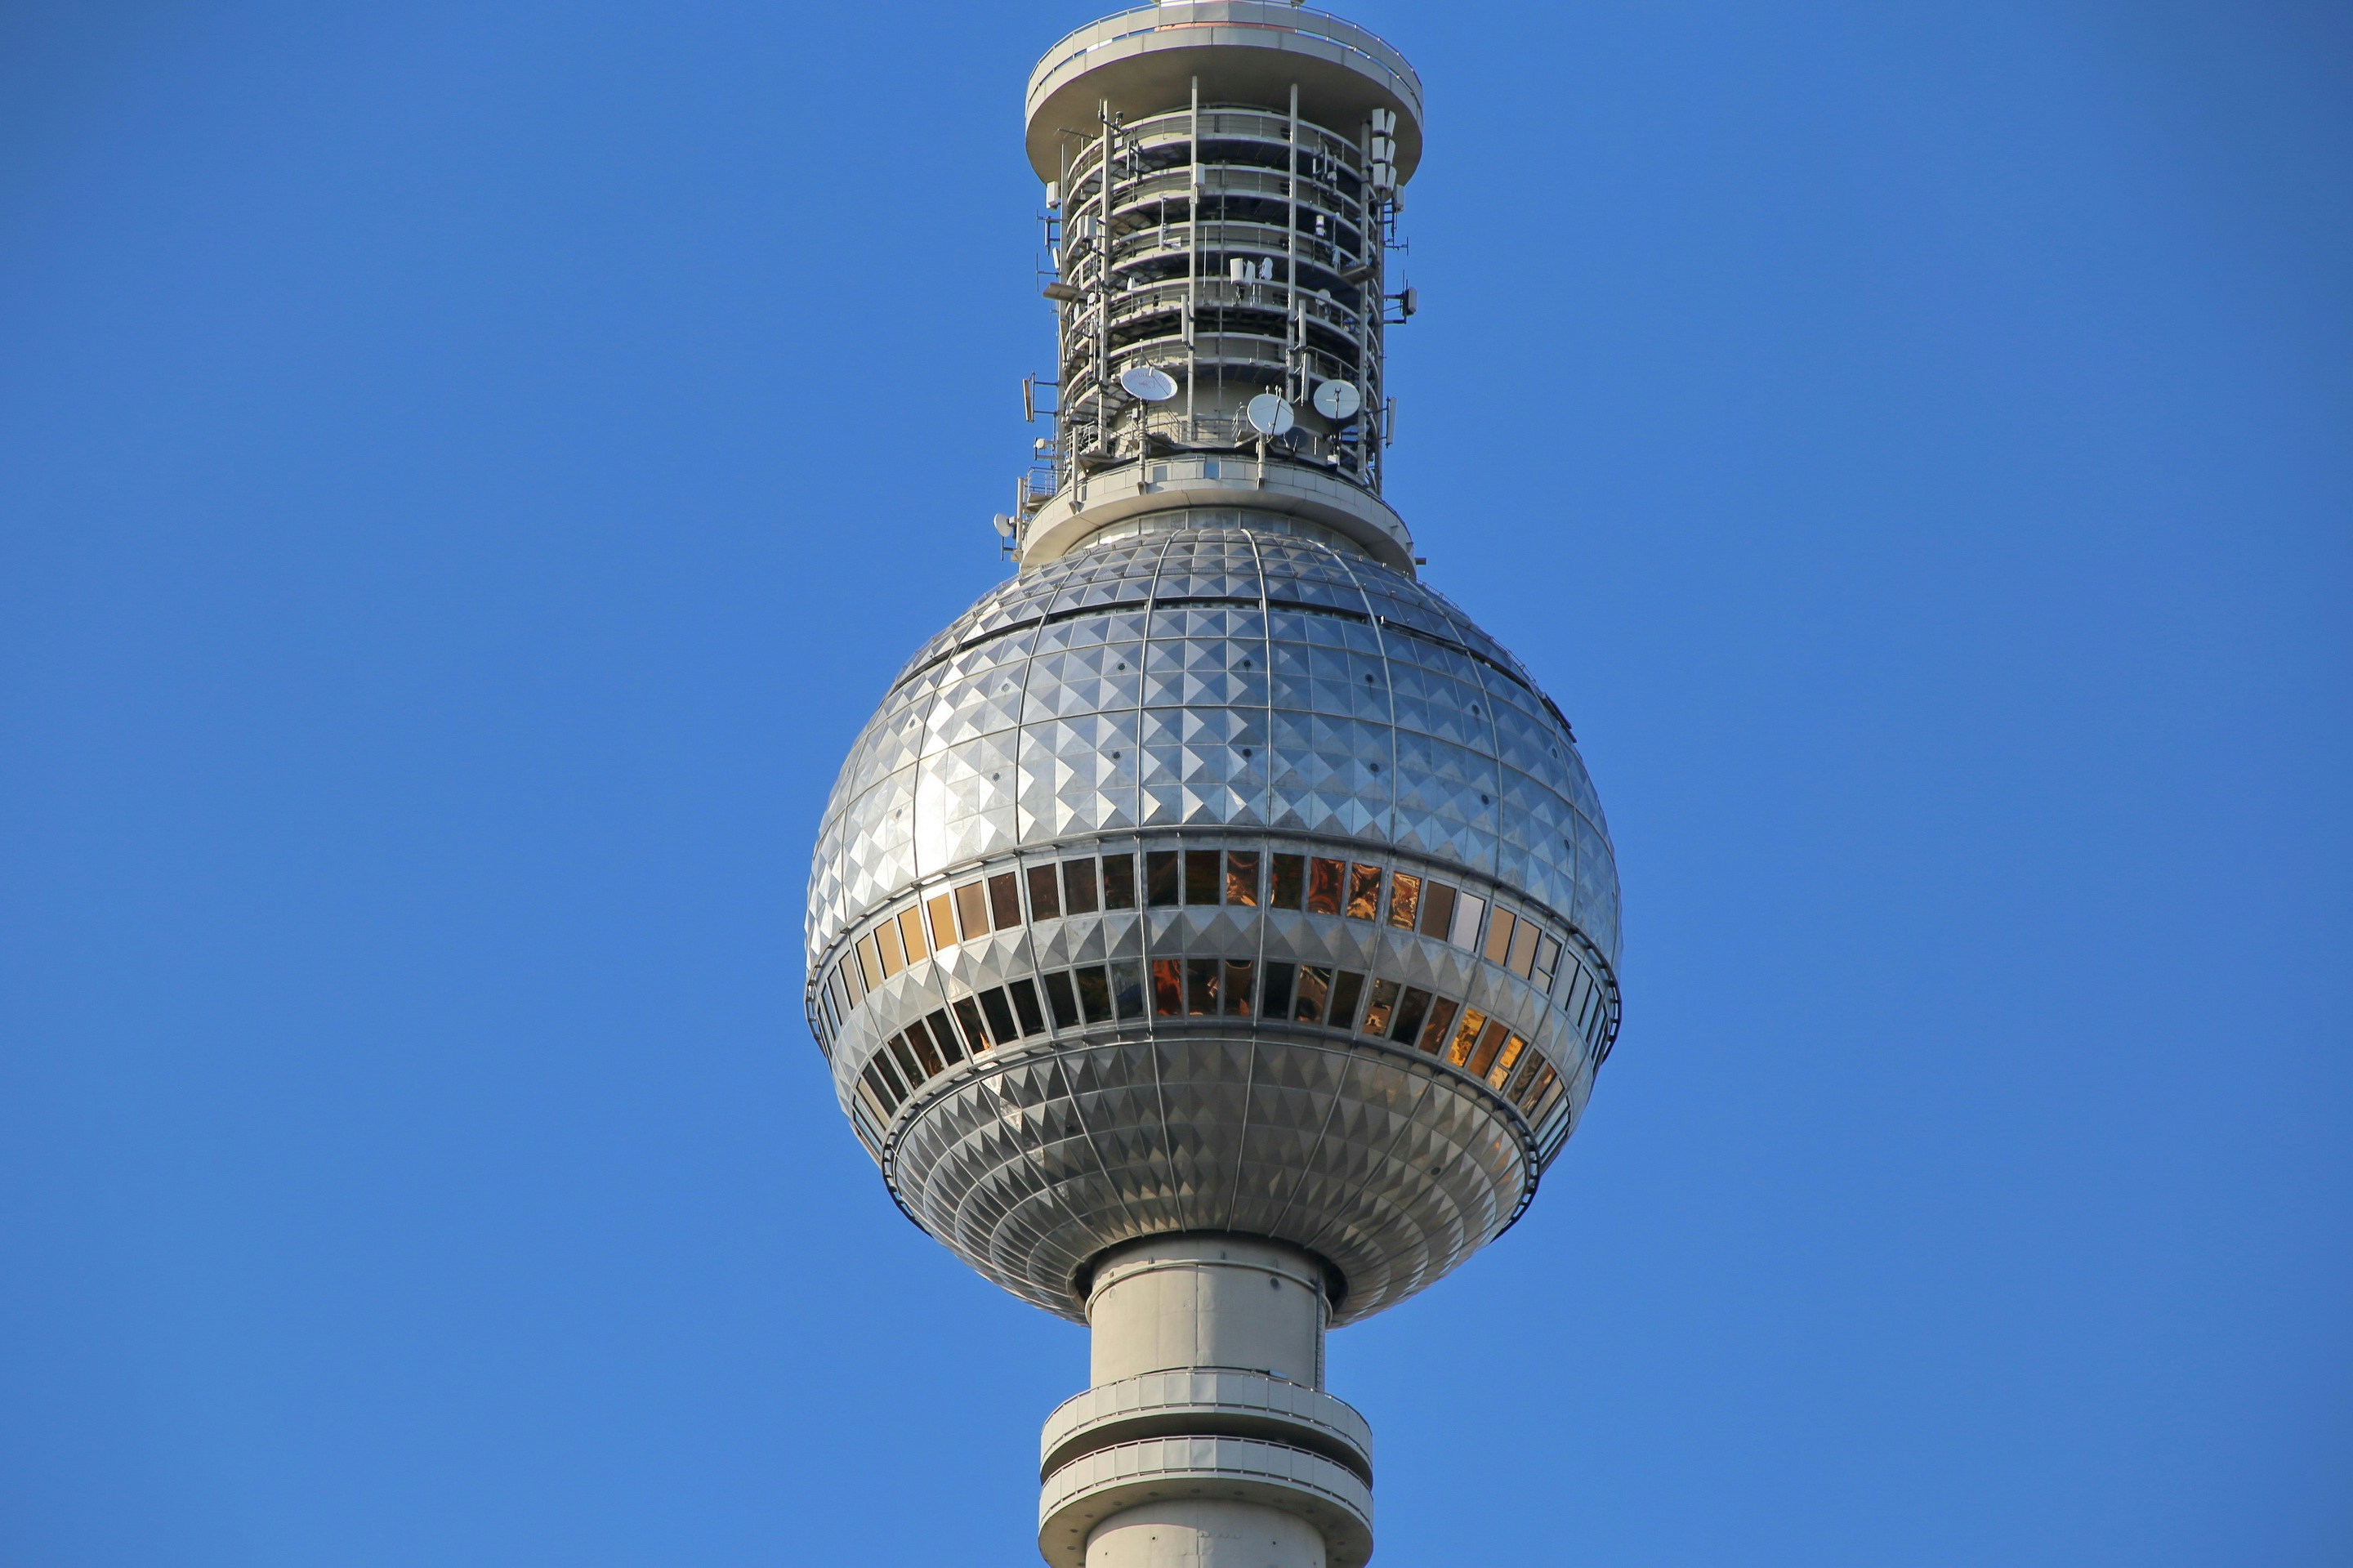 The bowl of TV tower in Berlin.